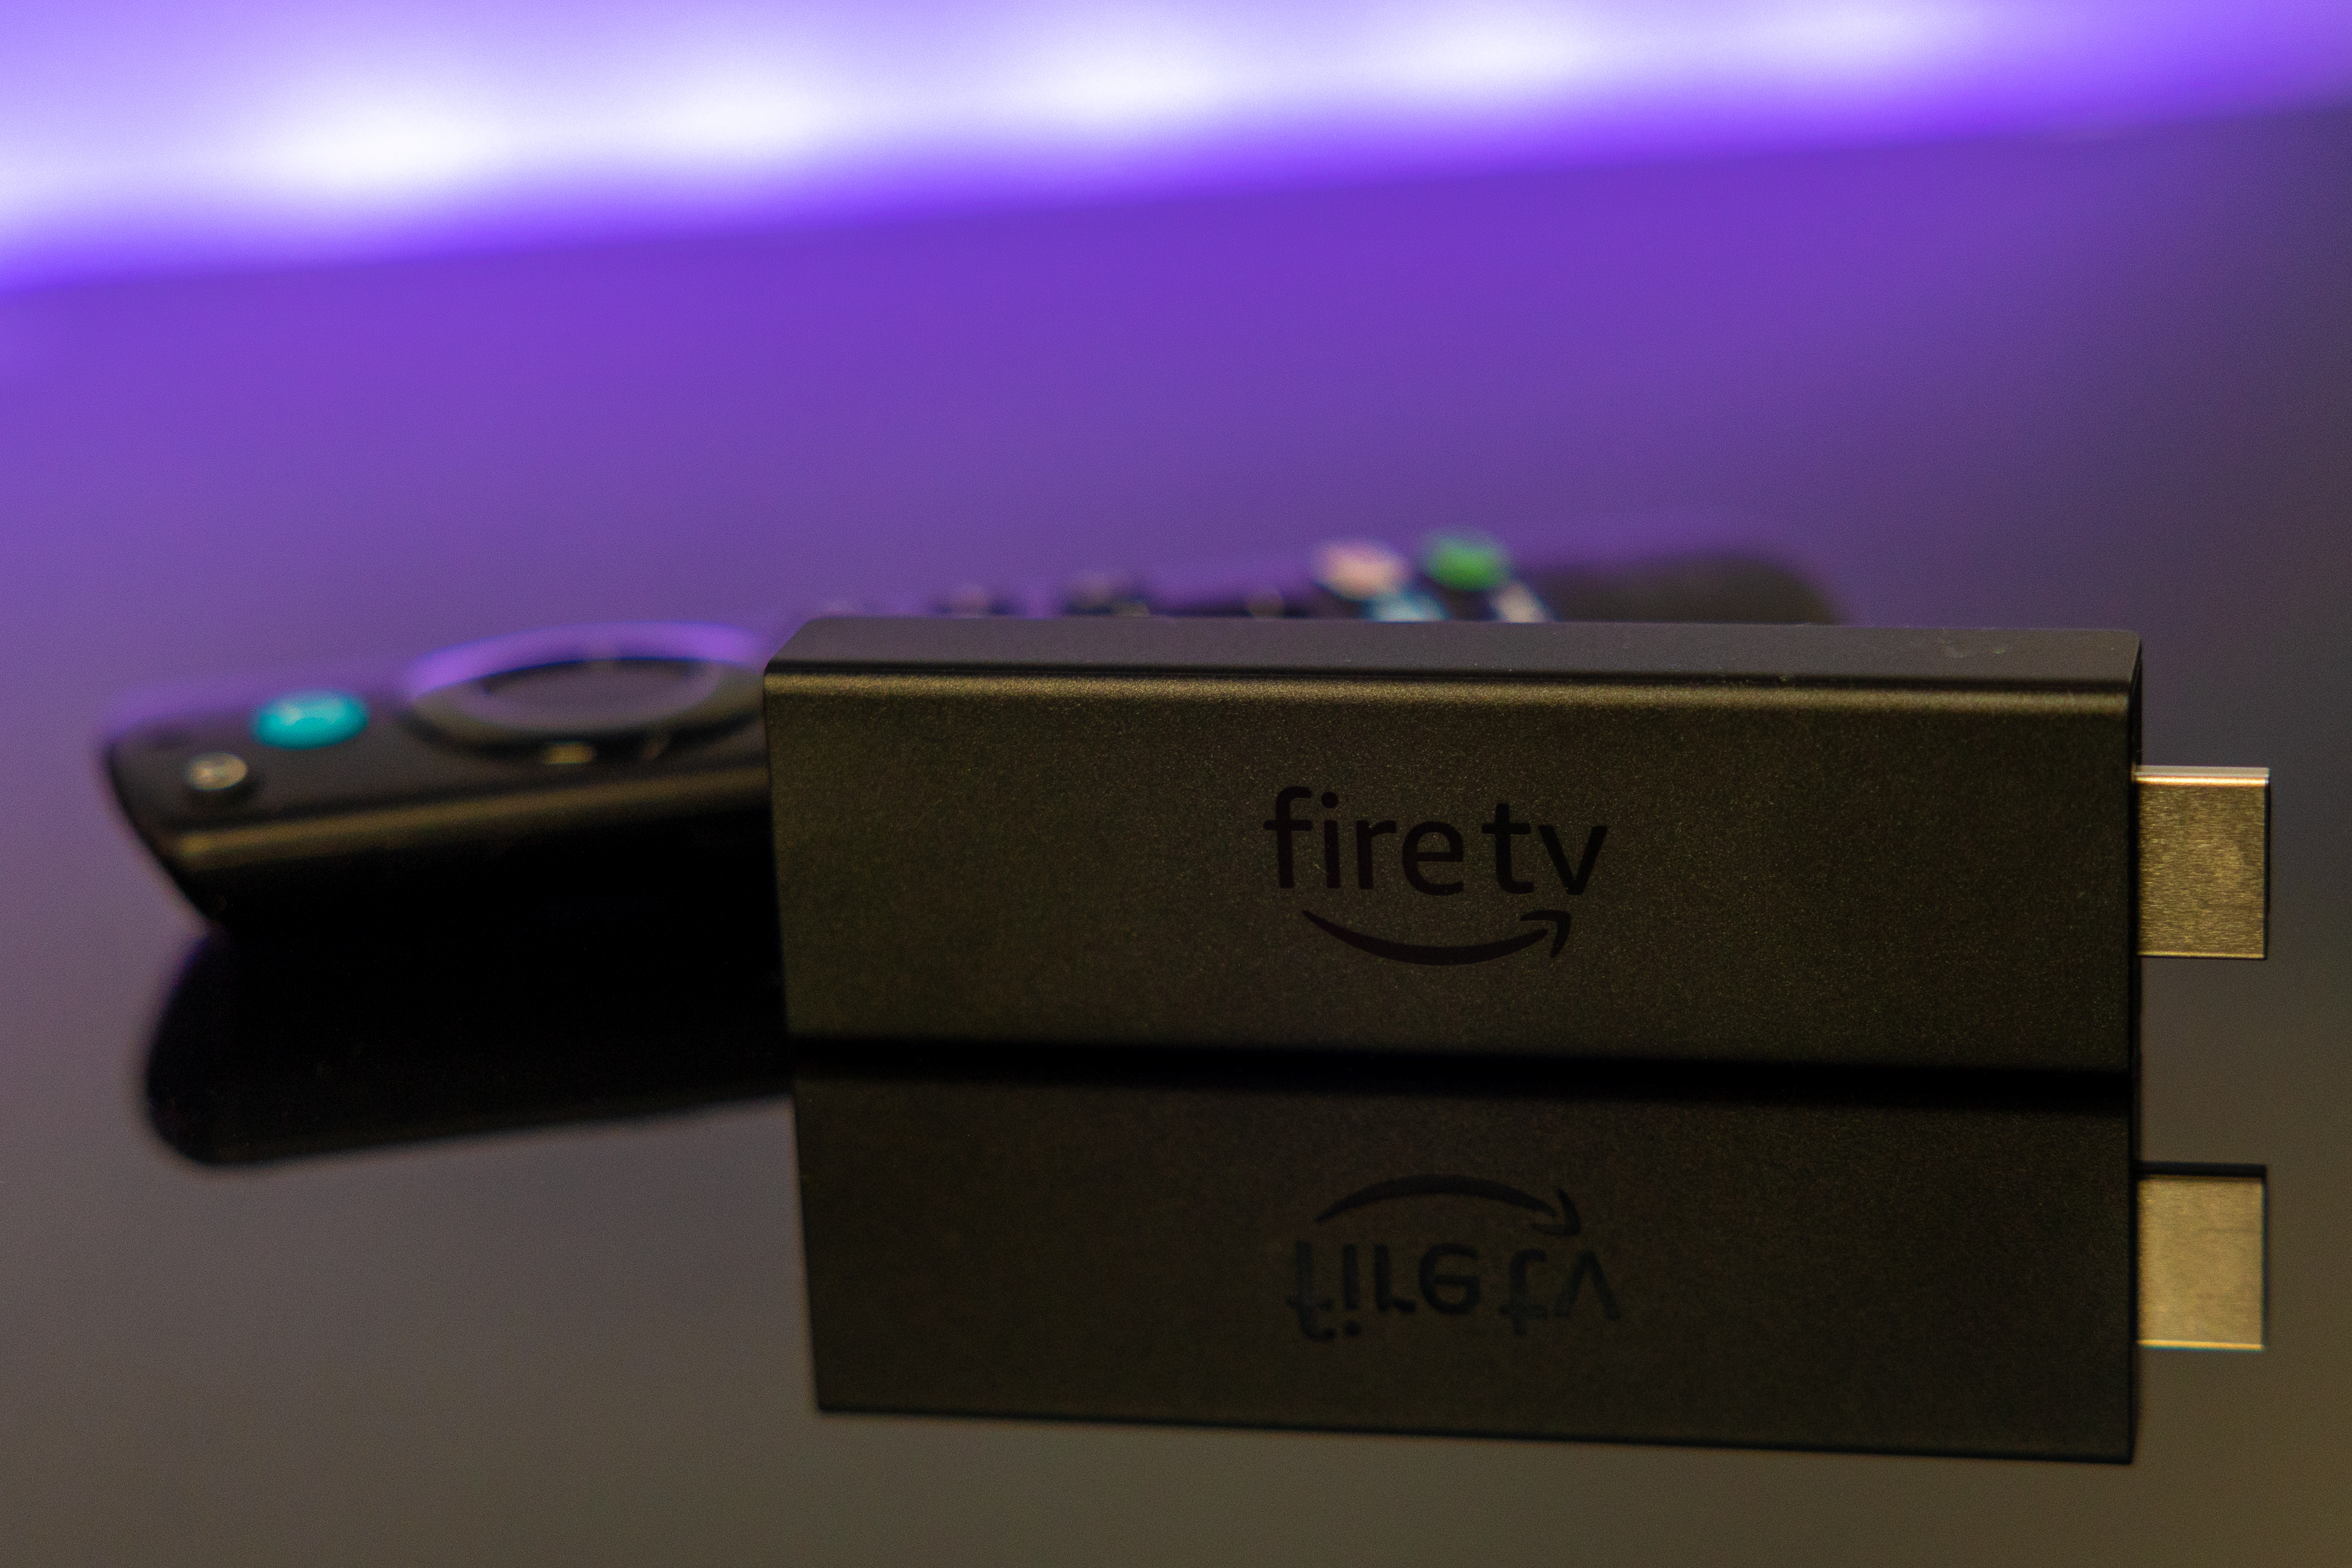 Amazon Fire TV Stick 4K Max Review: The New Standard | Digital Trends